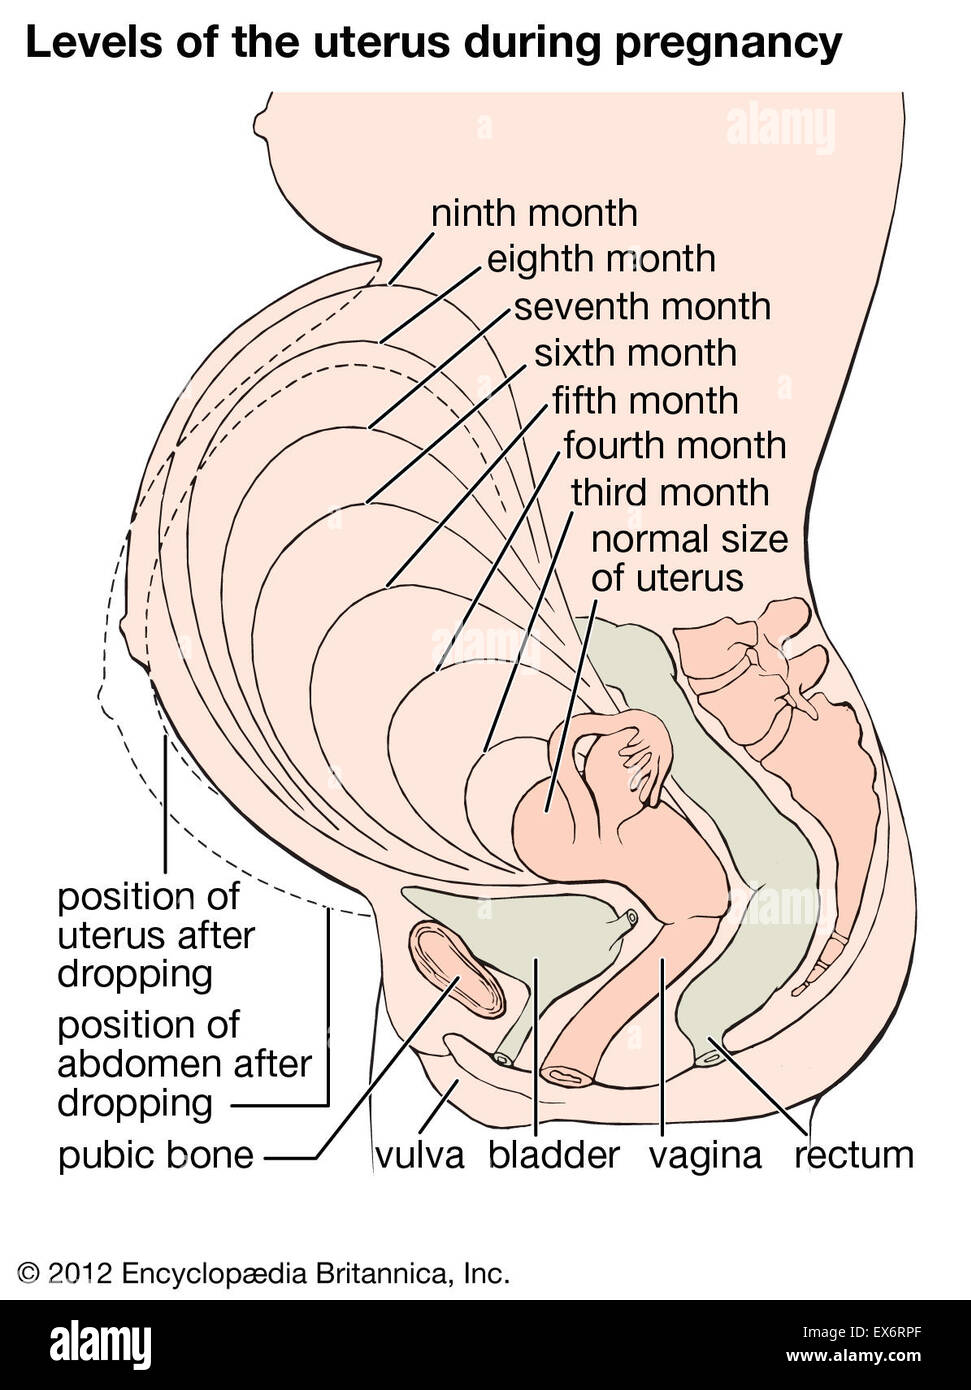 Levels of the uterus during pregnancy Stock Photo